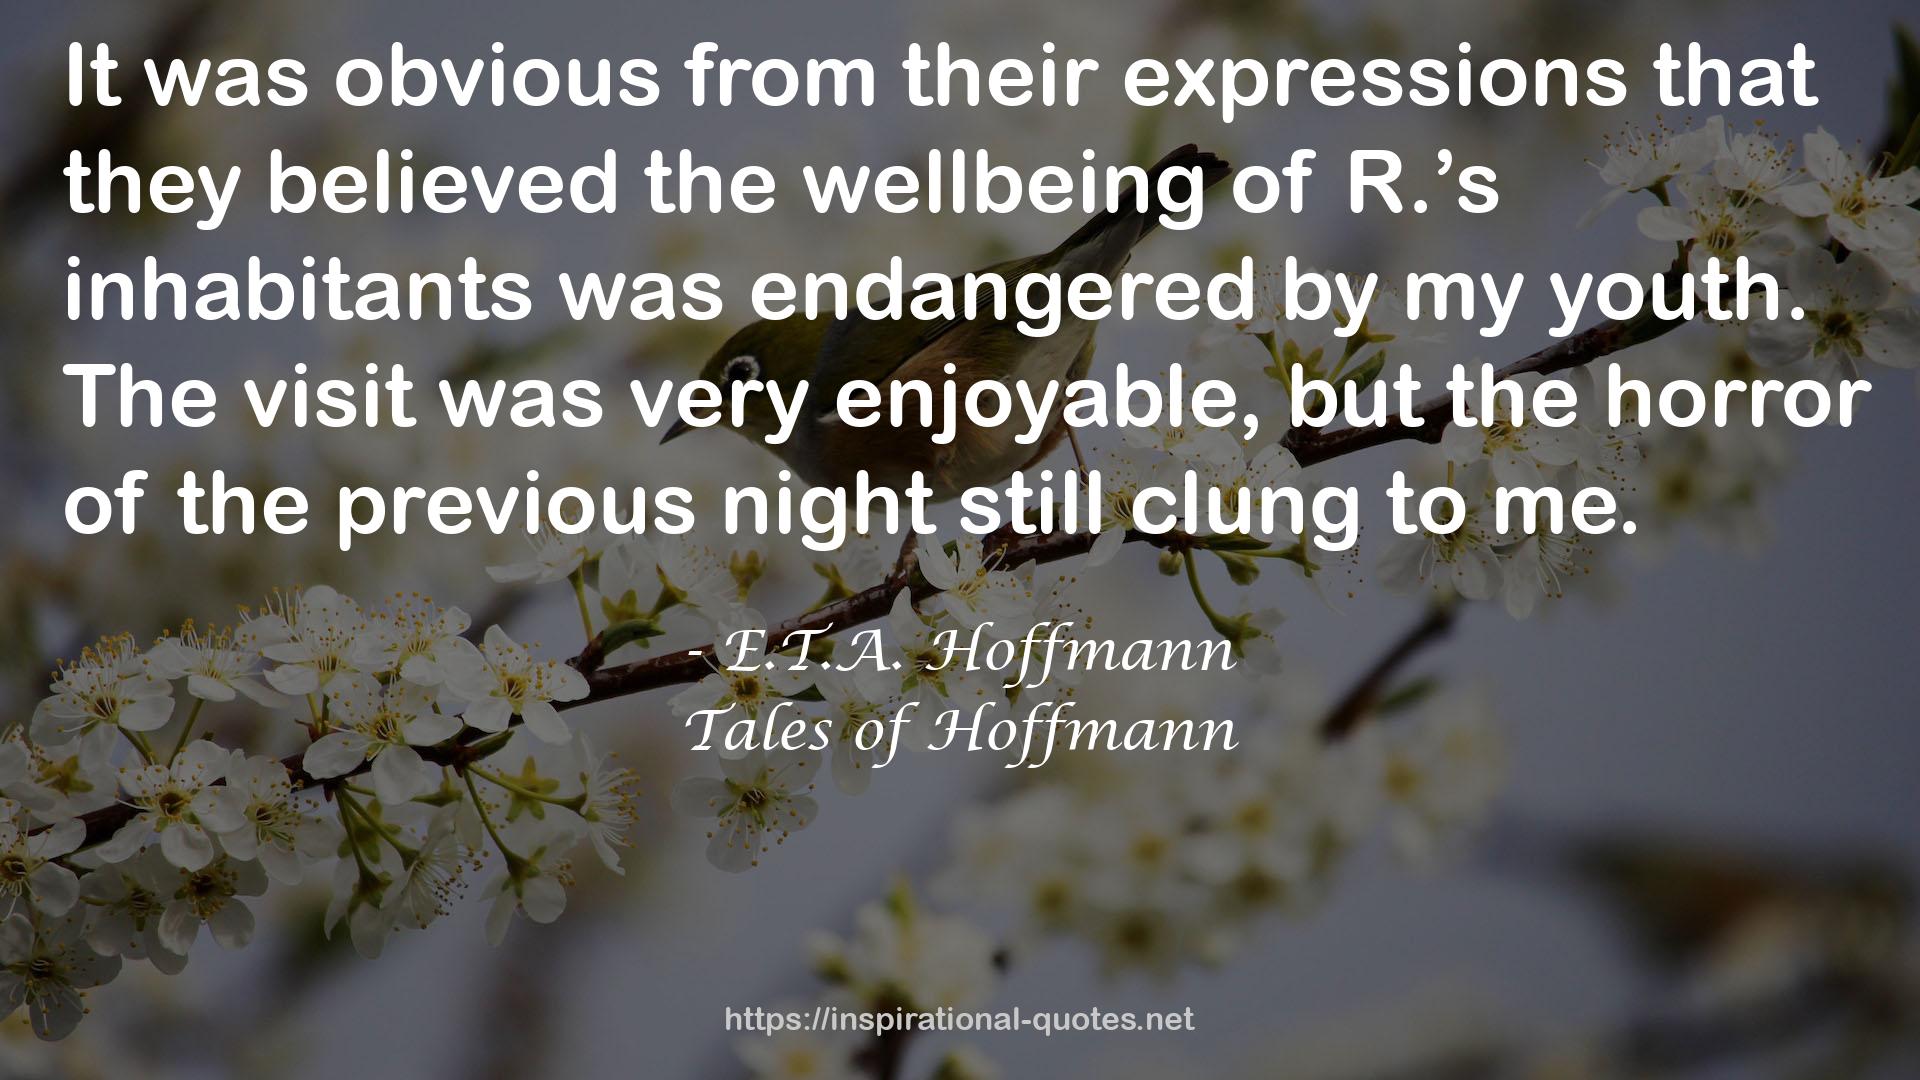 Tales of Hoffmann QUOTES